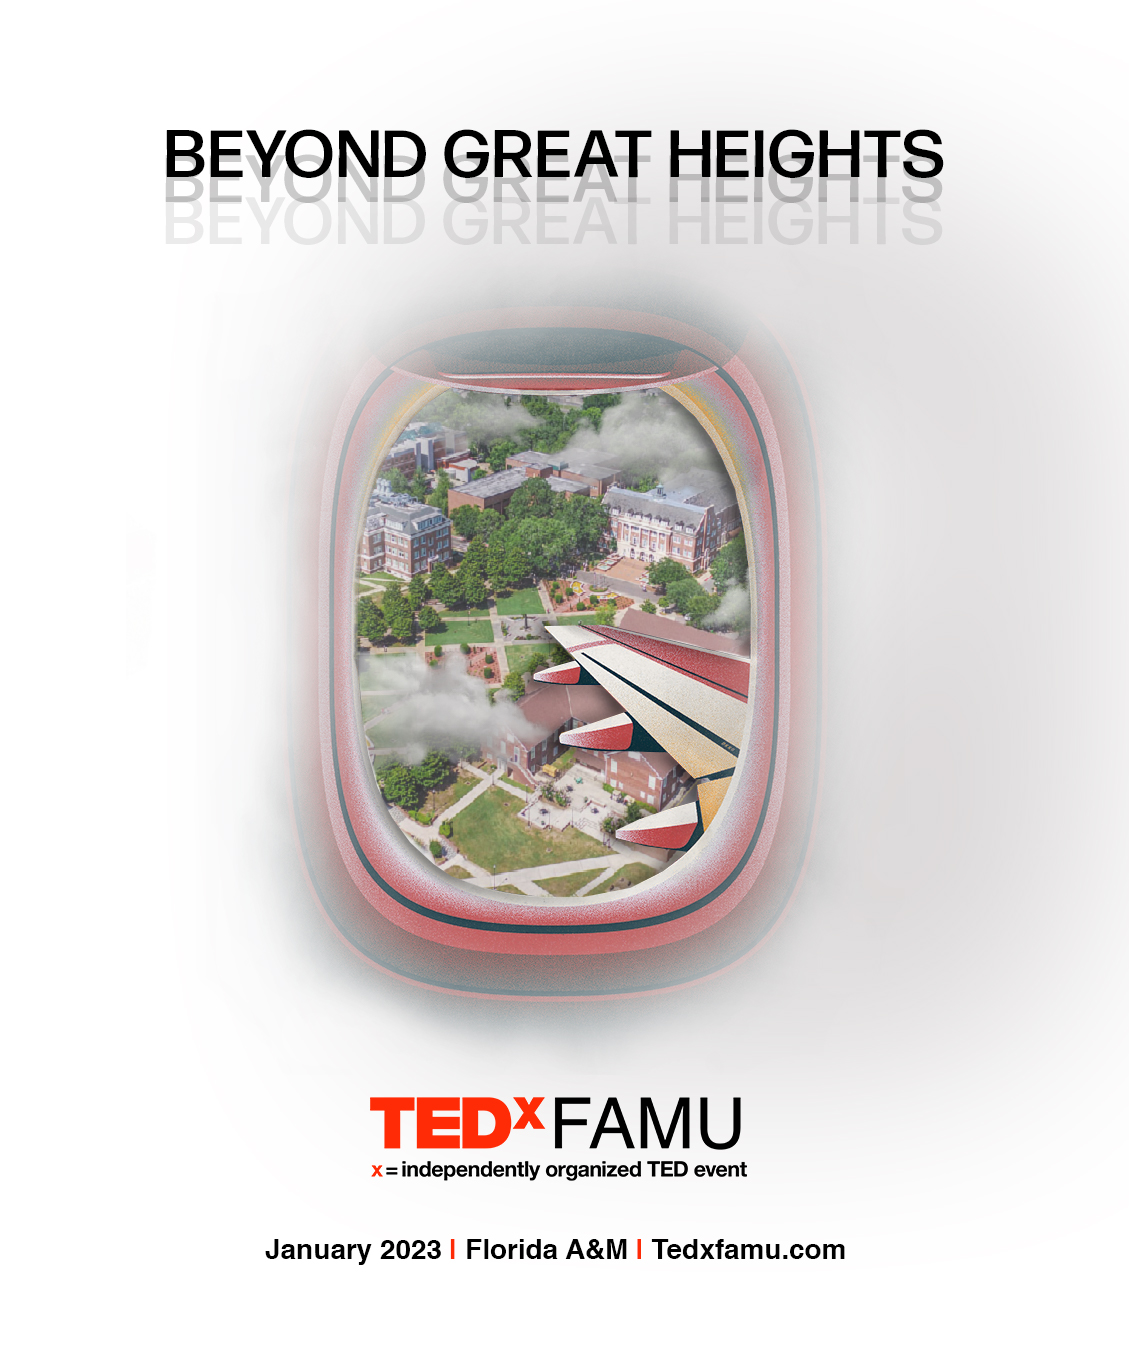 FAMU is going 'beyond great heights' with TedX